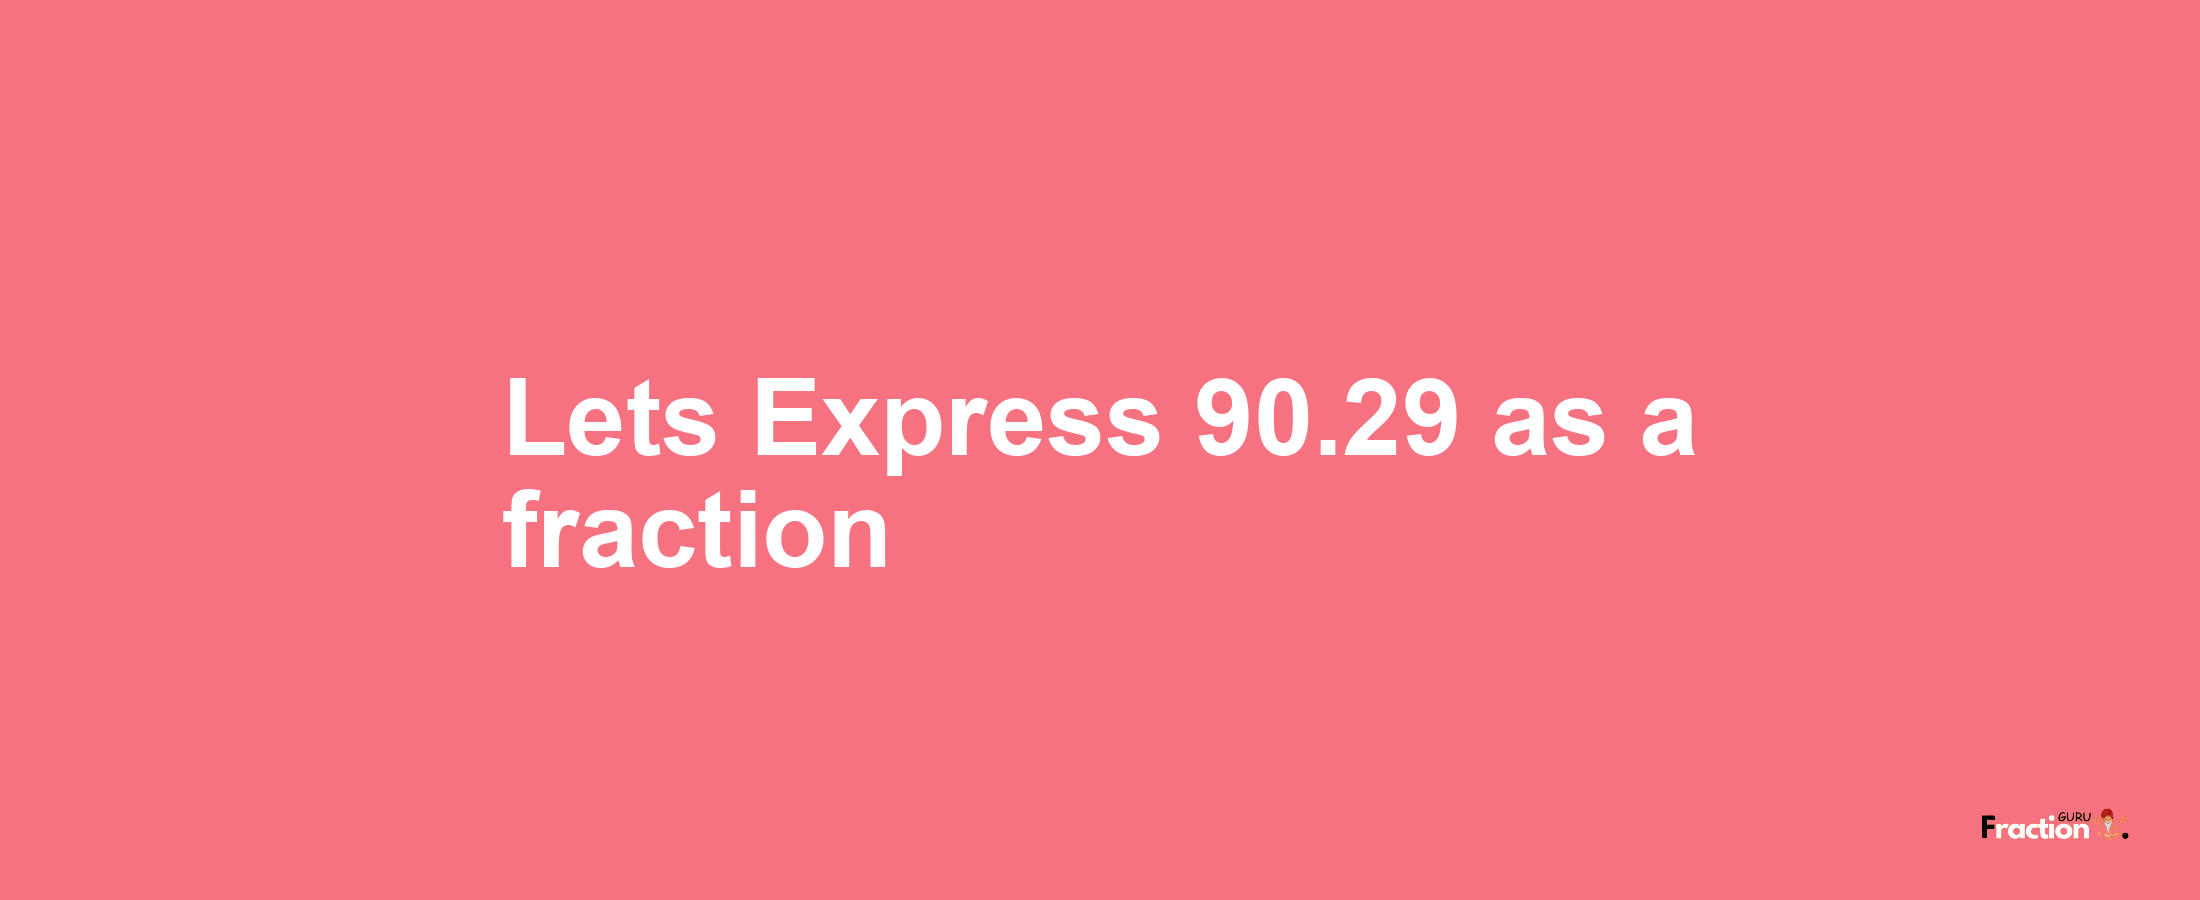 Lets Express 90.29 as afraction